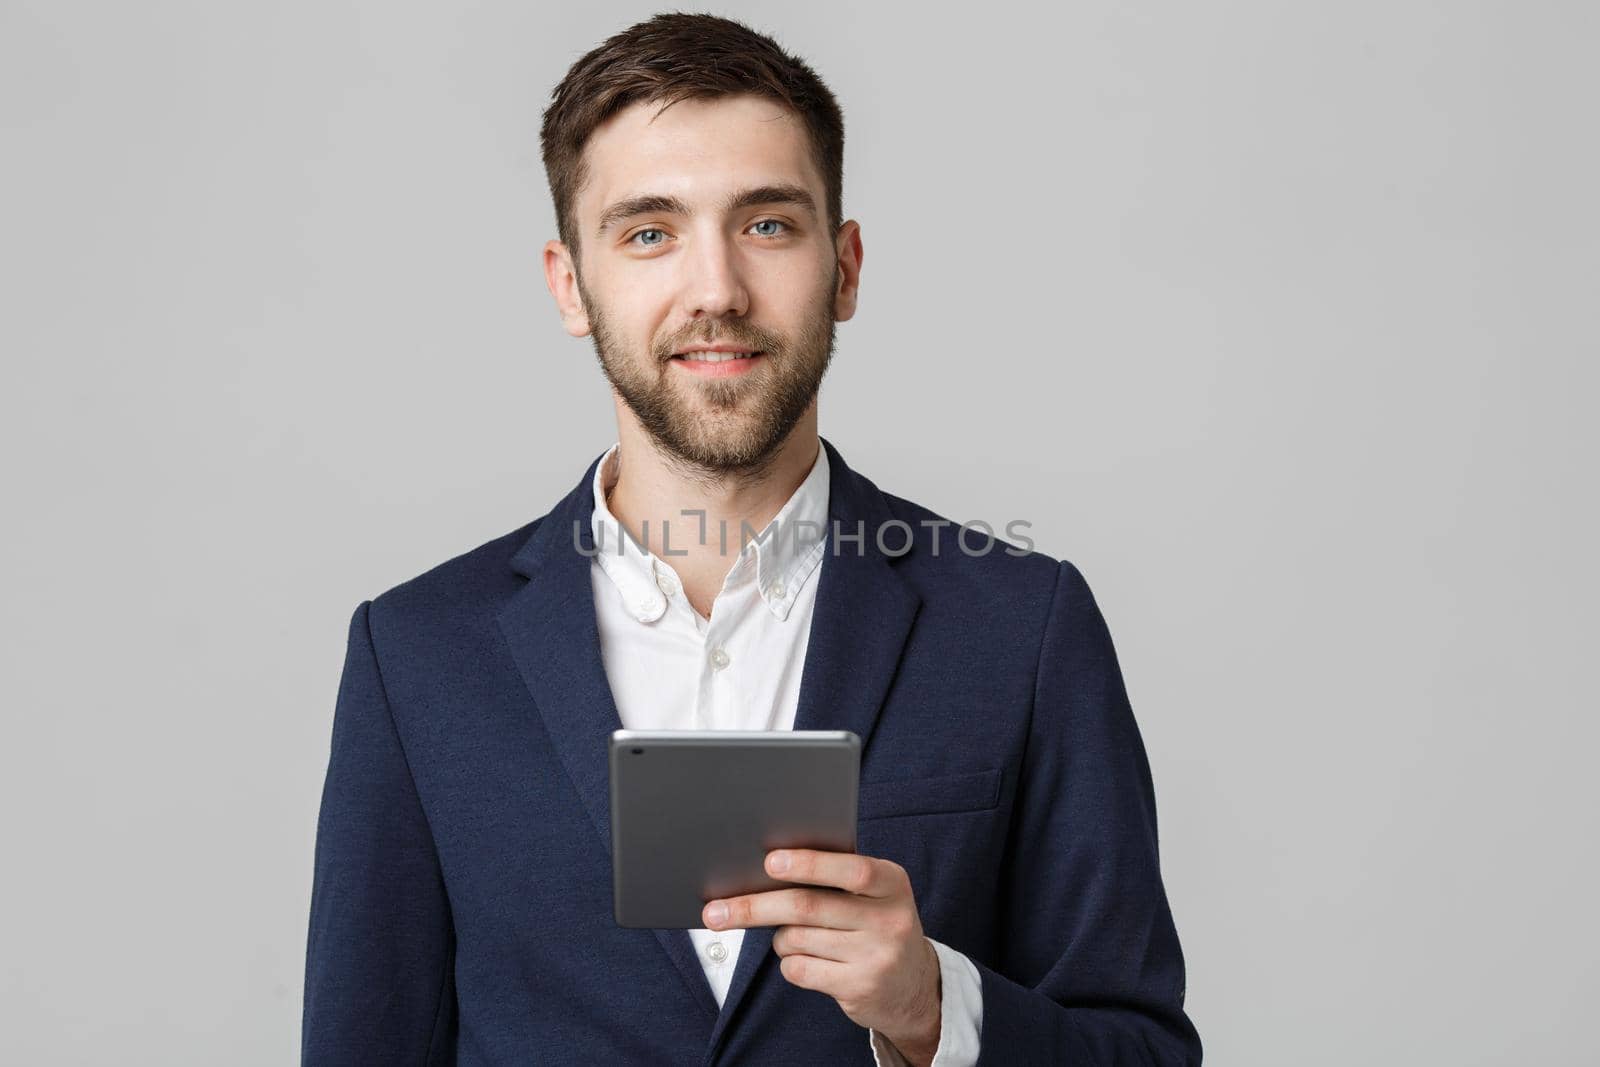 Business Concept - Portrait Handsome Business man playing digital tablet with smiling confident face. White Background. Copy Space.